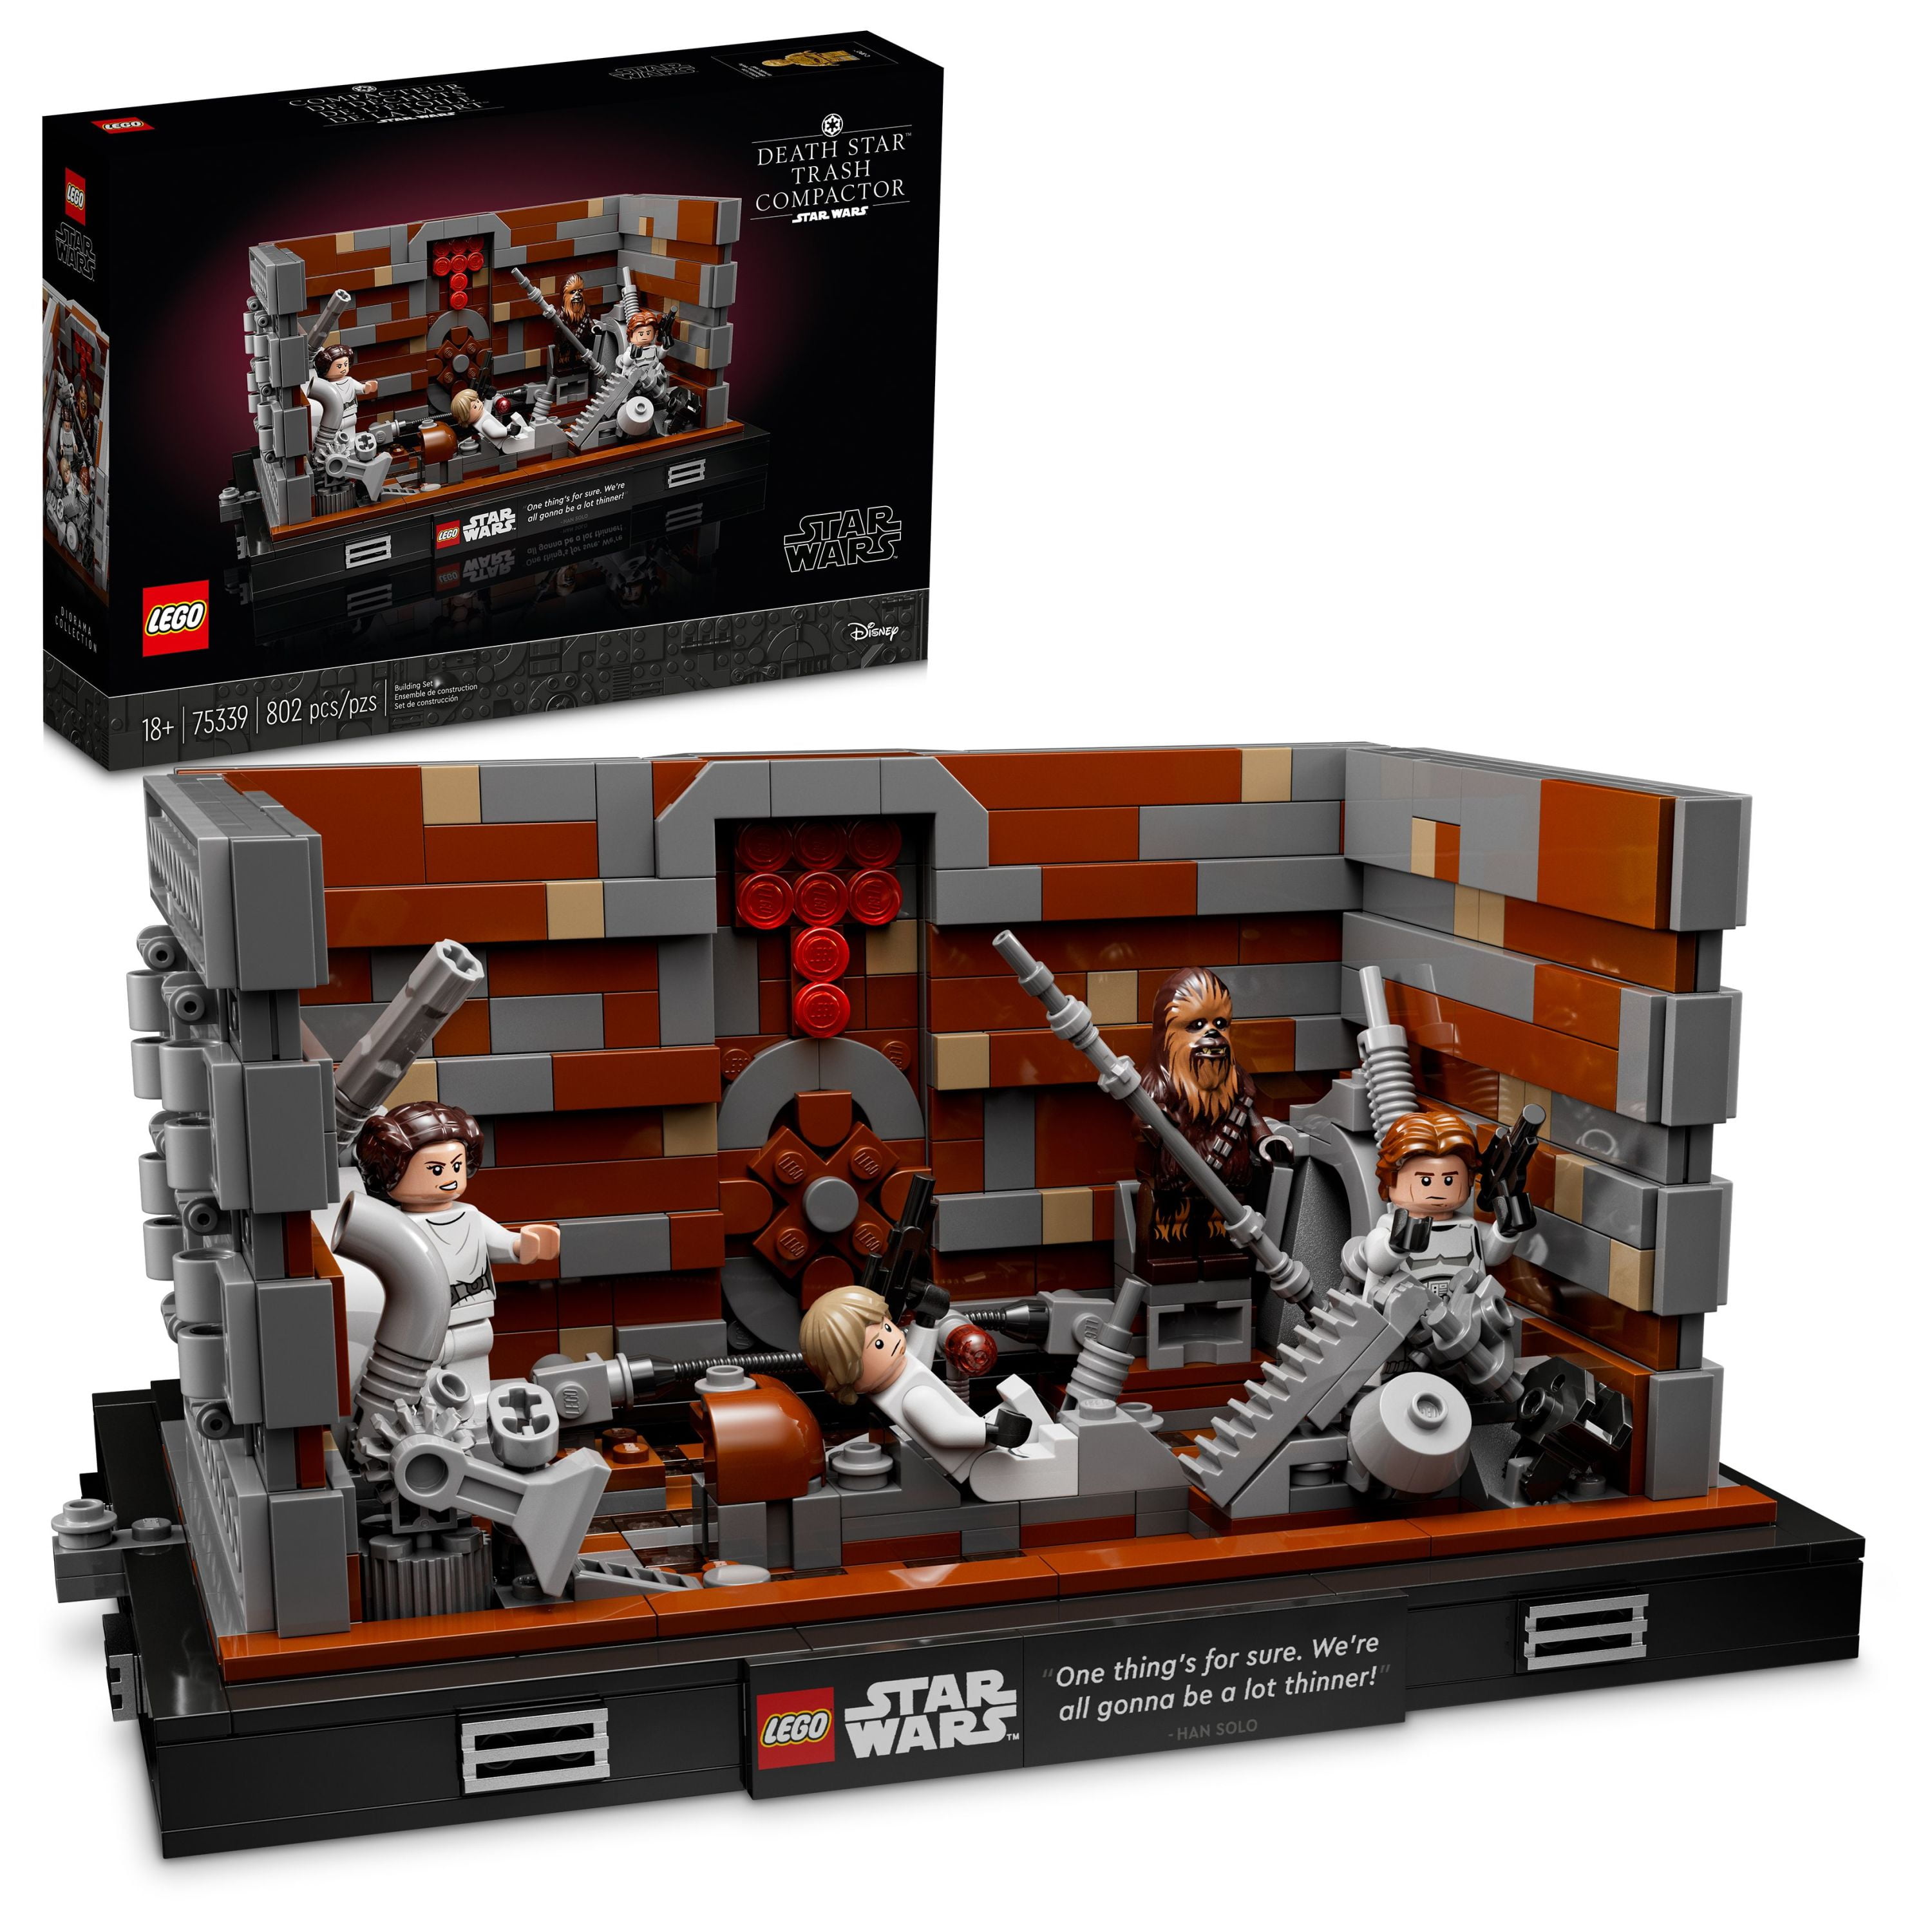 Namaak Je zal beter worden Prime LEGO Star Wars Death Star Trash Compactor Diorama Series 75339 Set for  Adults with Princess Leia, Chewbacca & R2-D2, Collection Memorabilia  Buildable Model, Unique Gift for Star Wars Fans - Walmart.com